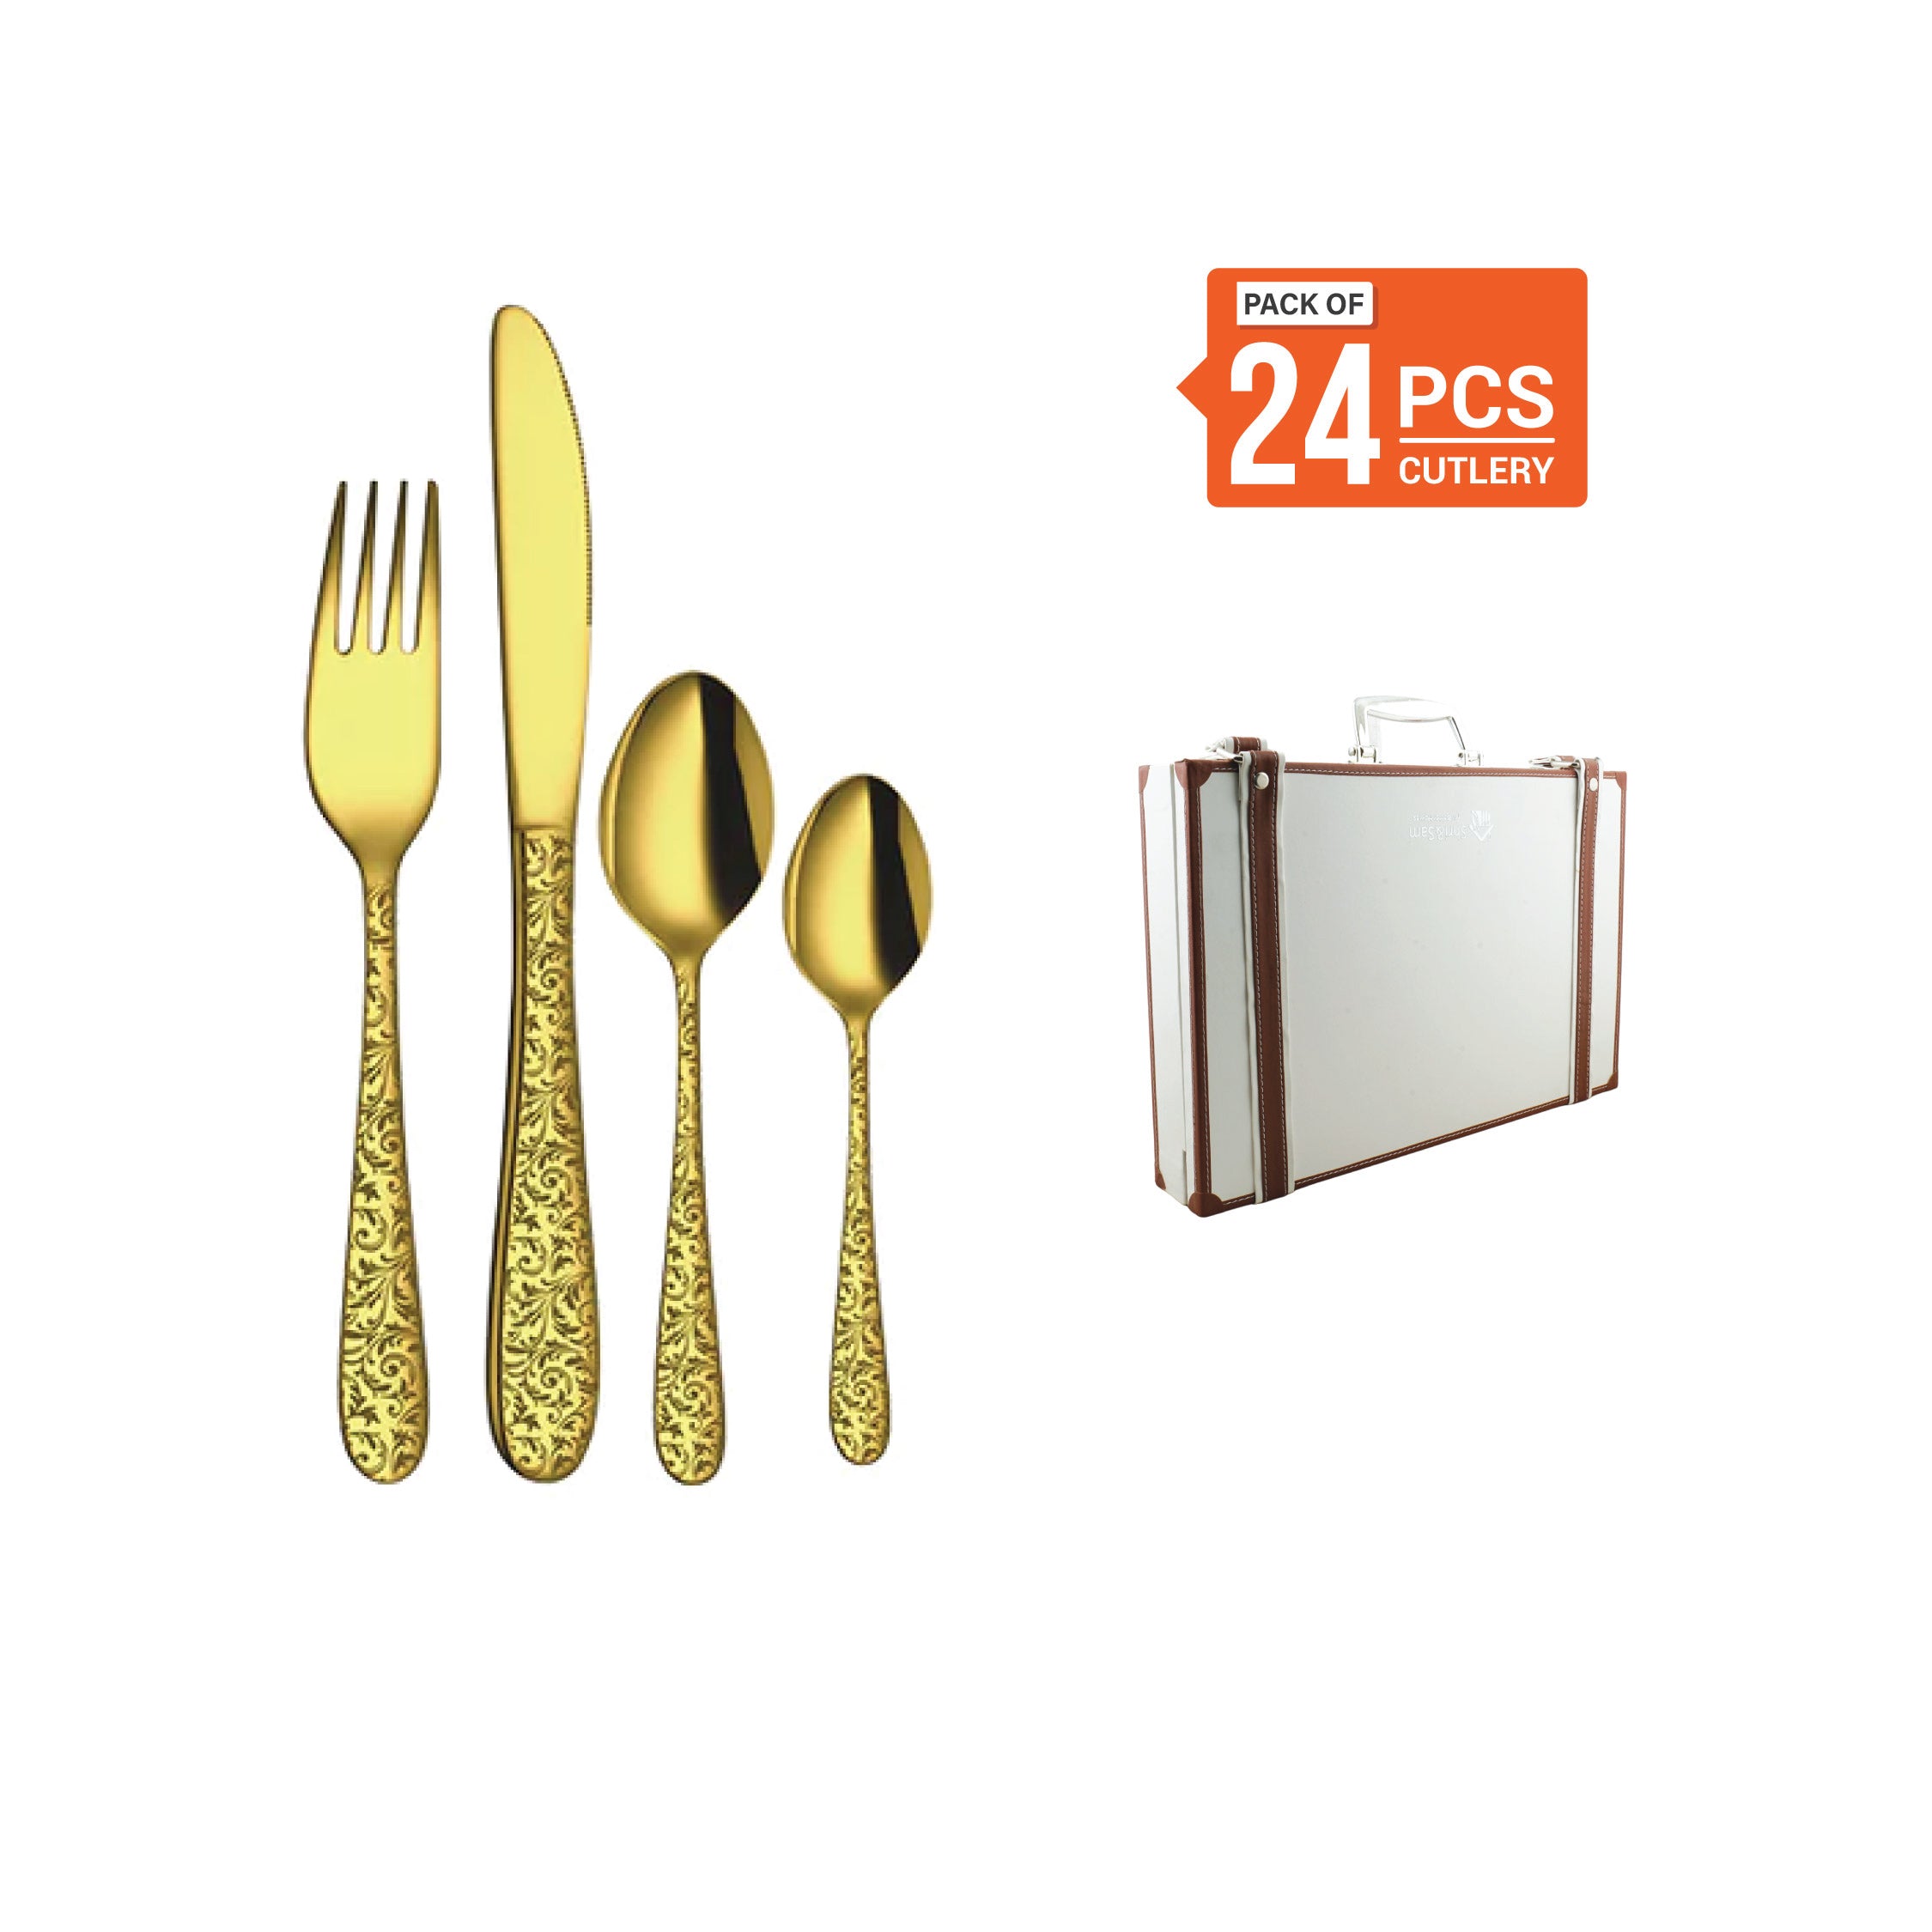 Stainless Steel 24 PCS Cutlery Set (6 Pcs Tea Spoon, 6 Pcs Dessert Spoon, 6 Pcs Dessert Fork and 6 Pcs Dessert Knife) with Leather Box and PVD Gold Coating with Laser Jasmine